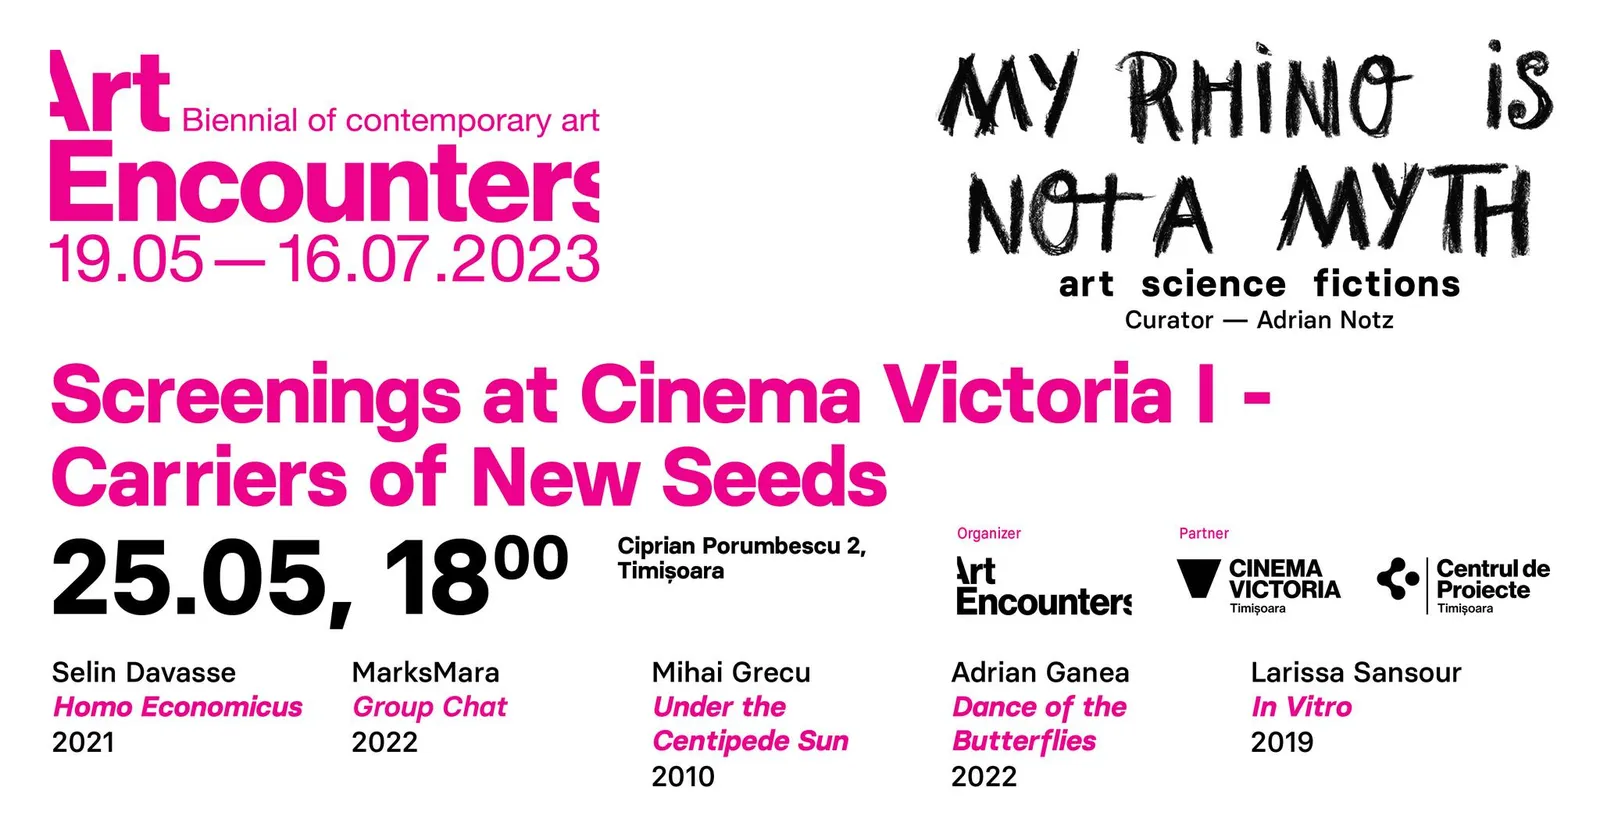 Screenings at Cinema Victoria I - Carries of New Seeds